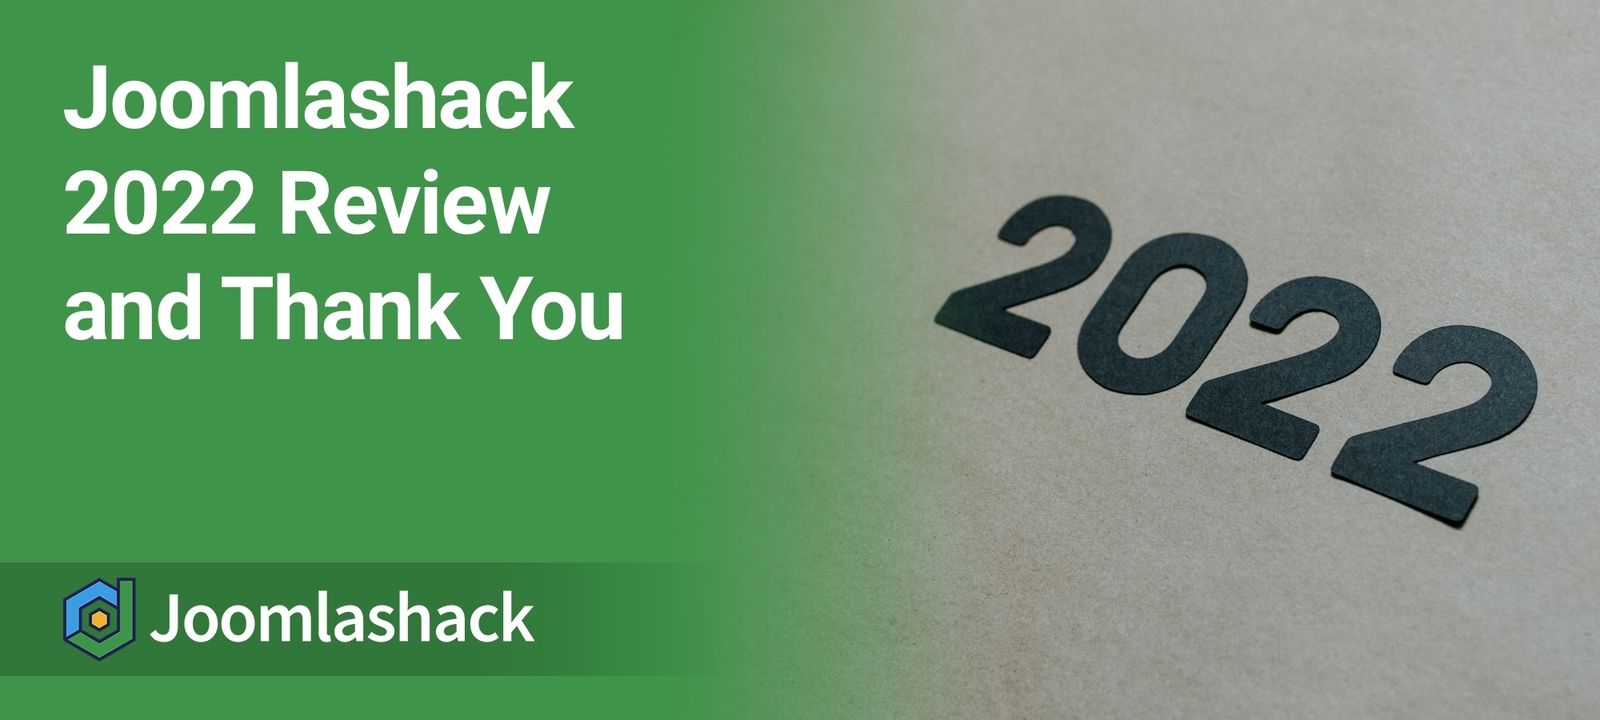 Joomlashack 2022 Review and Thank You 